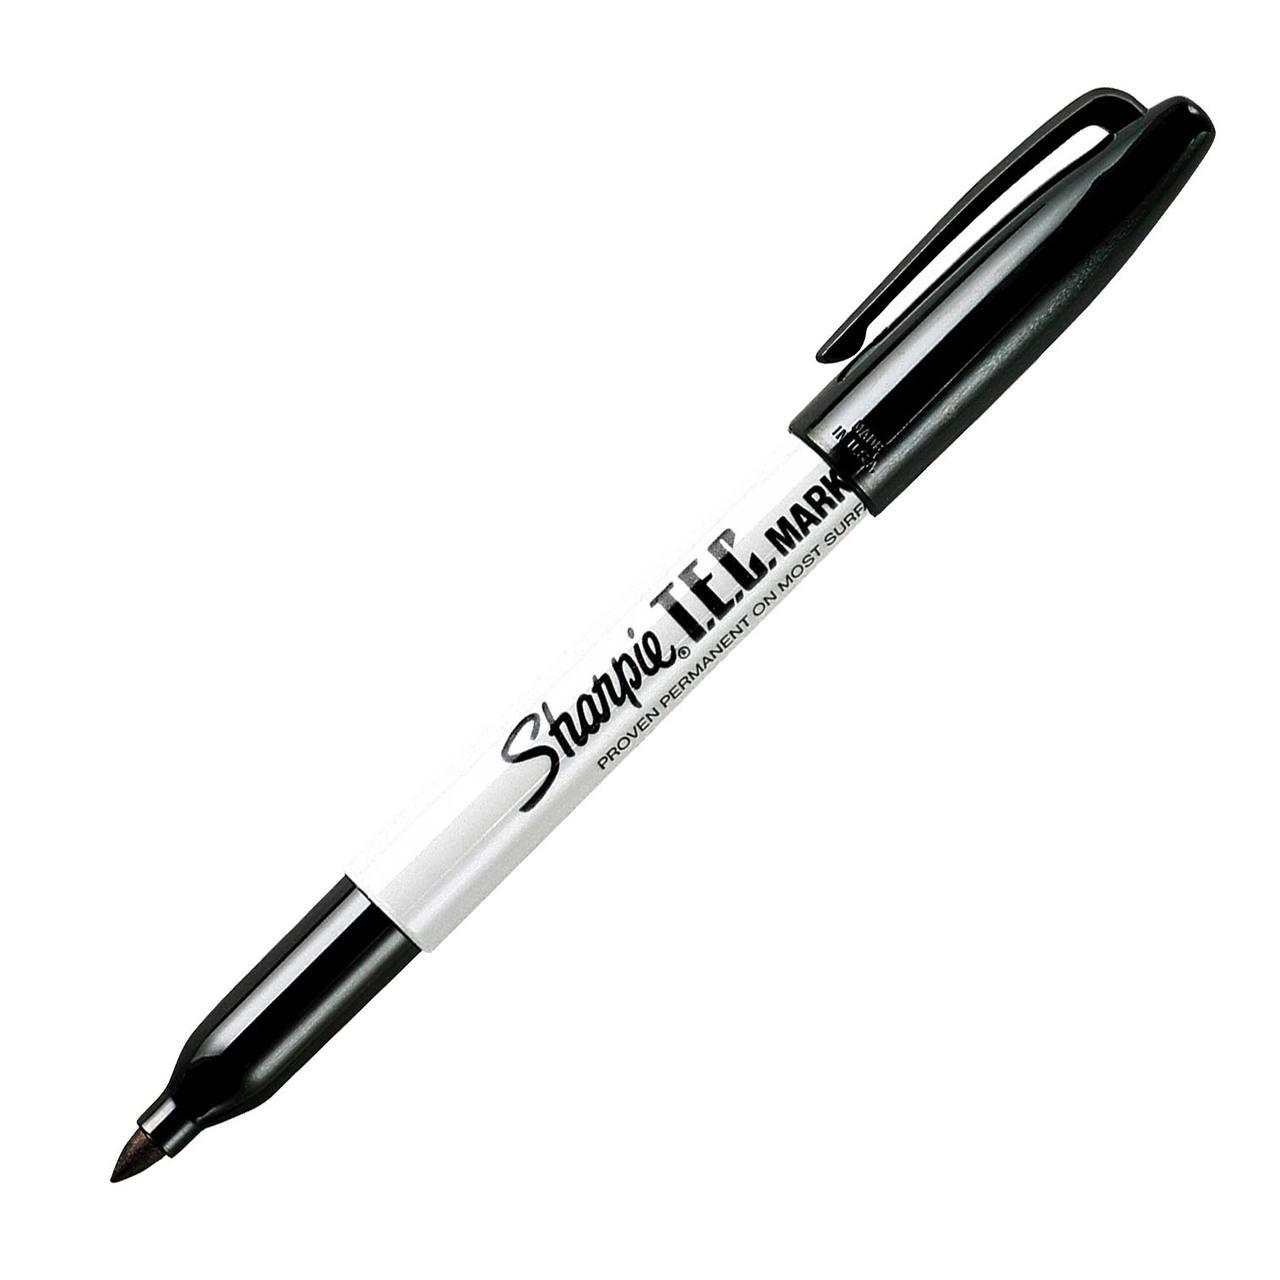 Sharpie 30173 100012033  Town & Country Hardware